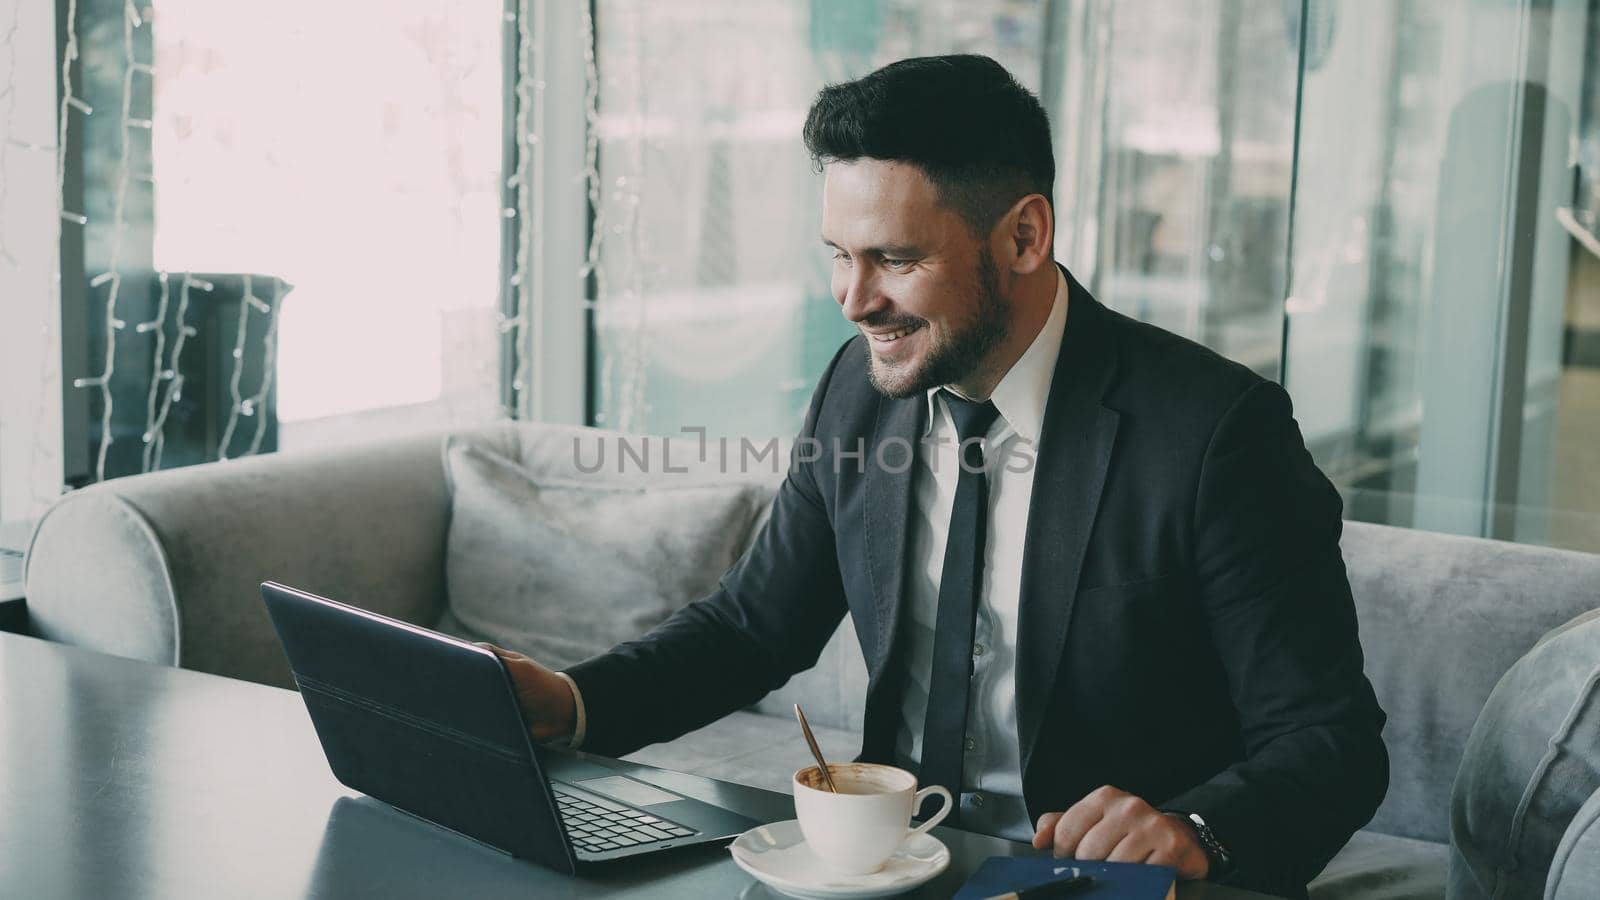 Caucasian businessman in formal clothes chatting through laptop webcam and waving his hand happily in a classy cafe during lunch time. by silverkblack